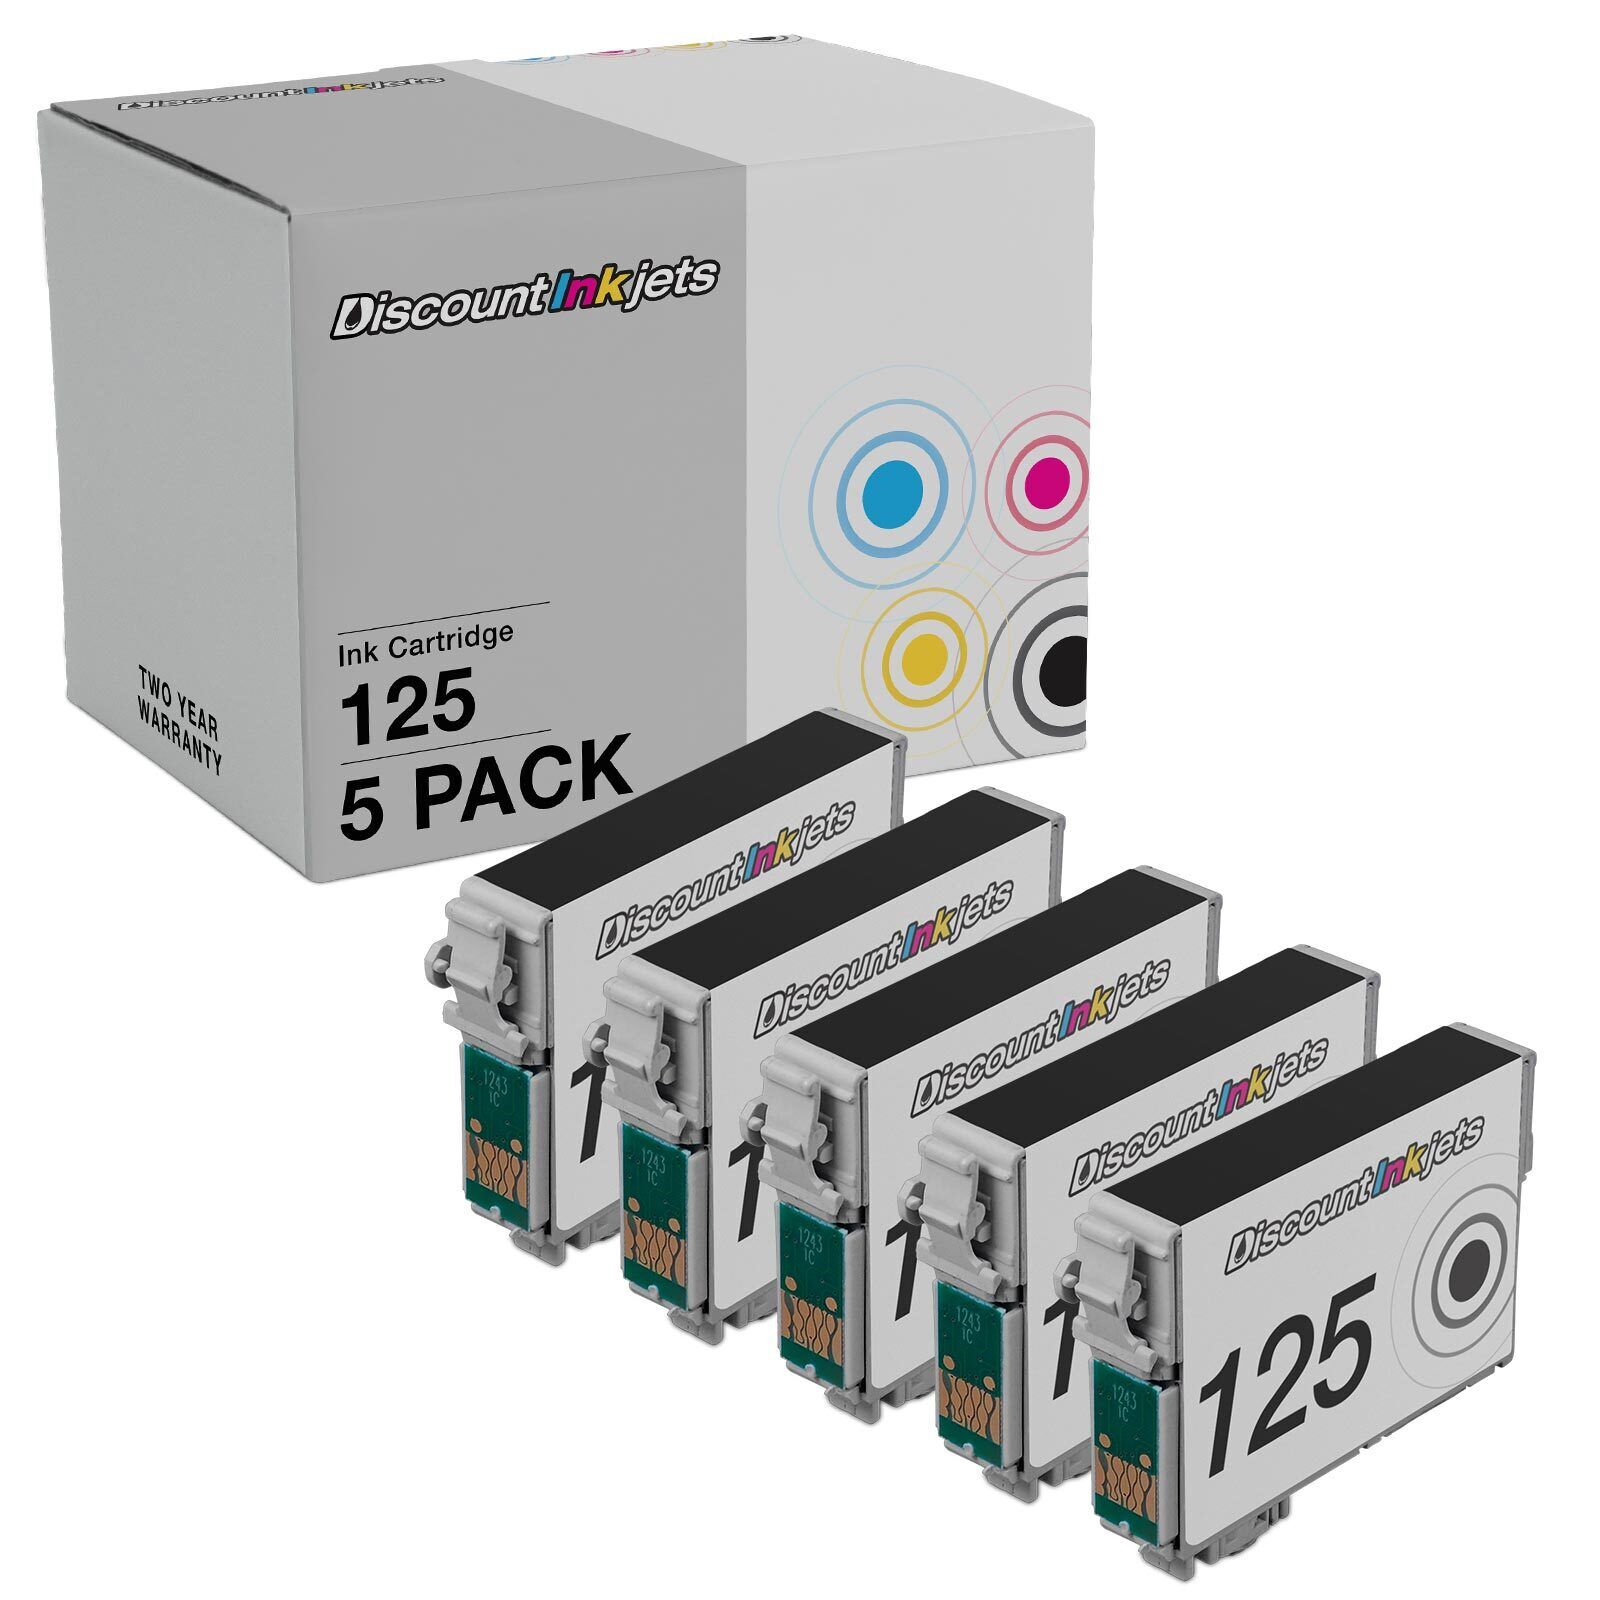 Ink Cartridge Replacements for Epson 125 (Black, 5-Pack)